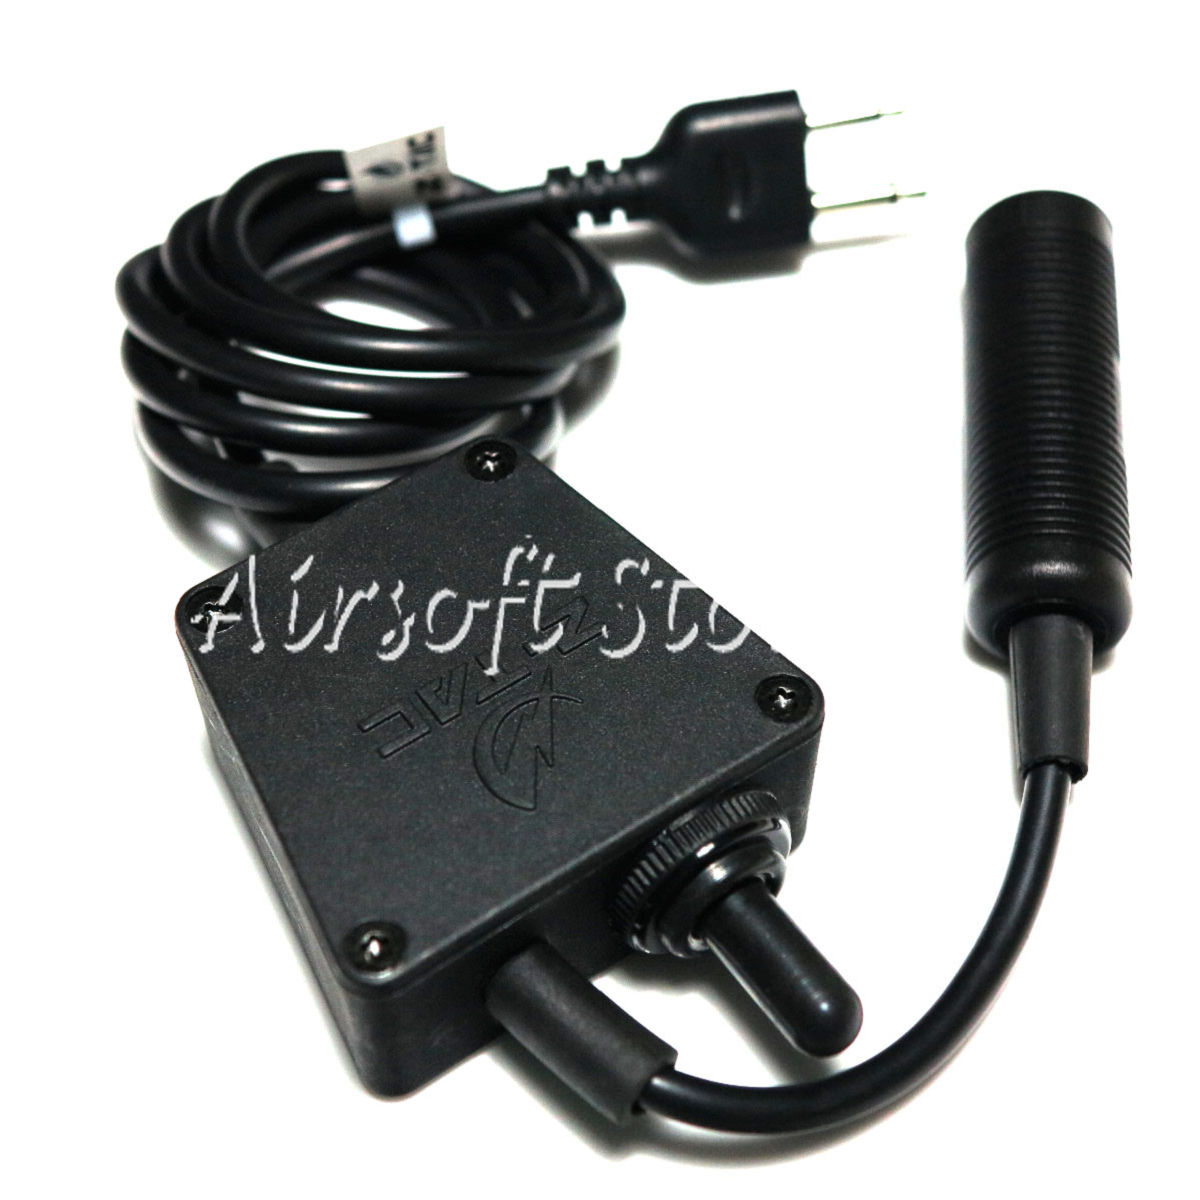 Airsoft SWAT Communications Gear Z Tactical E-Switch Headset PTT for ICOM 2 Pin Radio